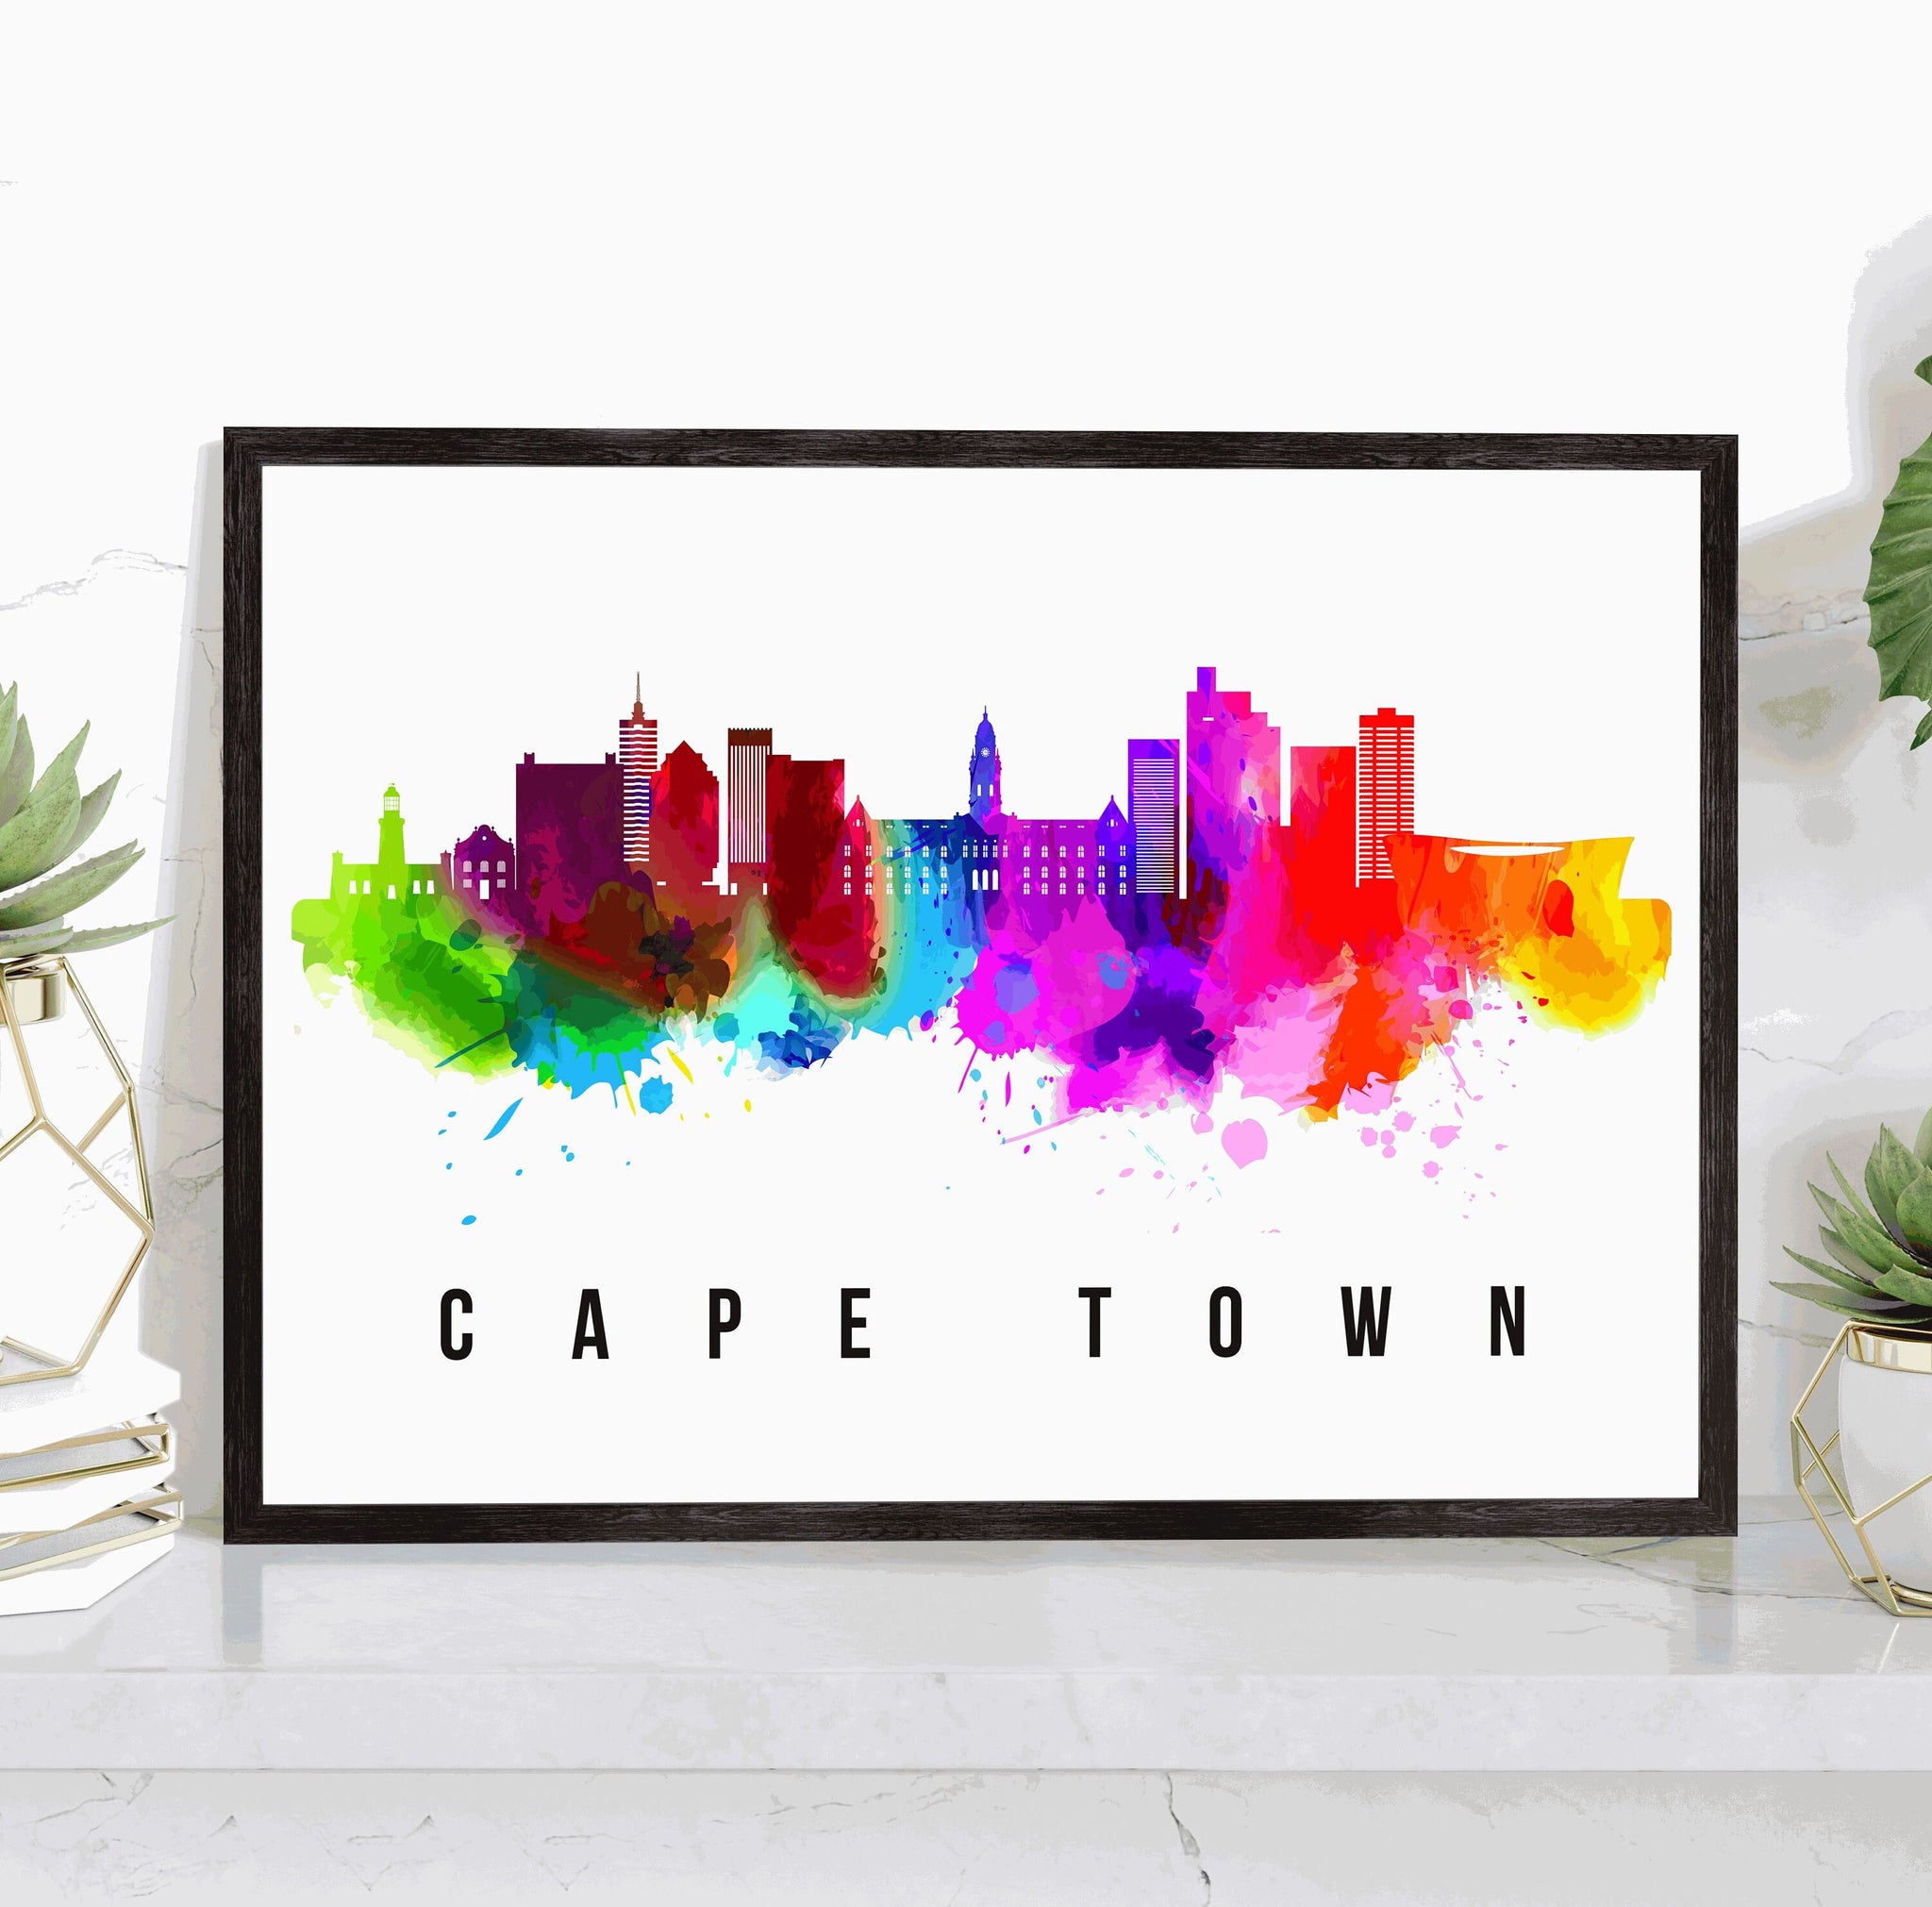 CAPETOWN - SOUTH AFRICA Poster,  Skyline Poster Cityscape and Landmark Print, Capetown Illustration Home Wall Art, Office Wall Decor